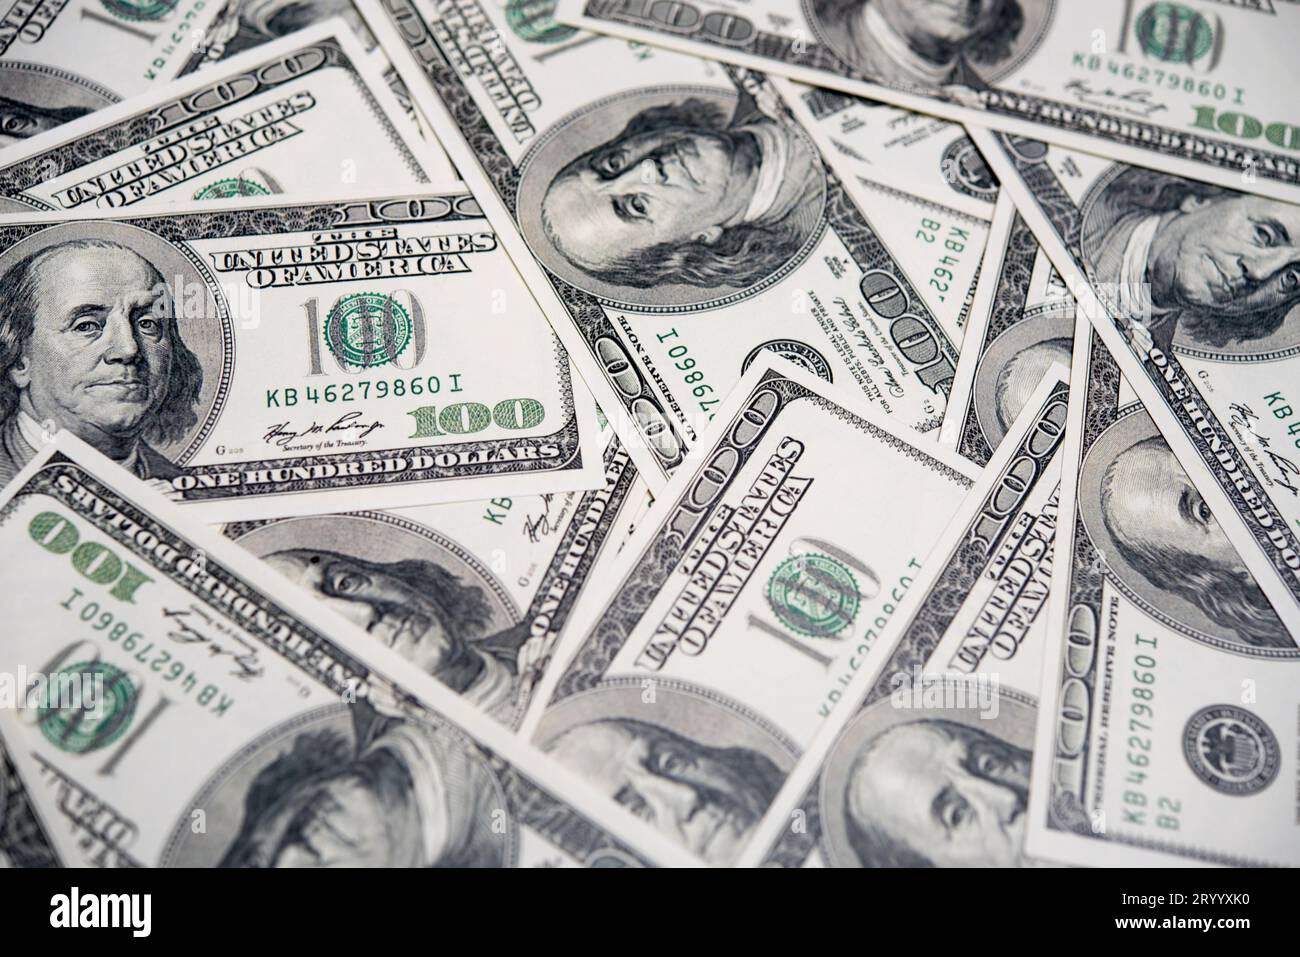 A pile of hundred dollar bills, Economic of America concept Stock Photo